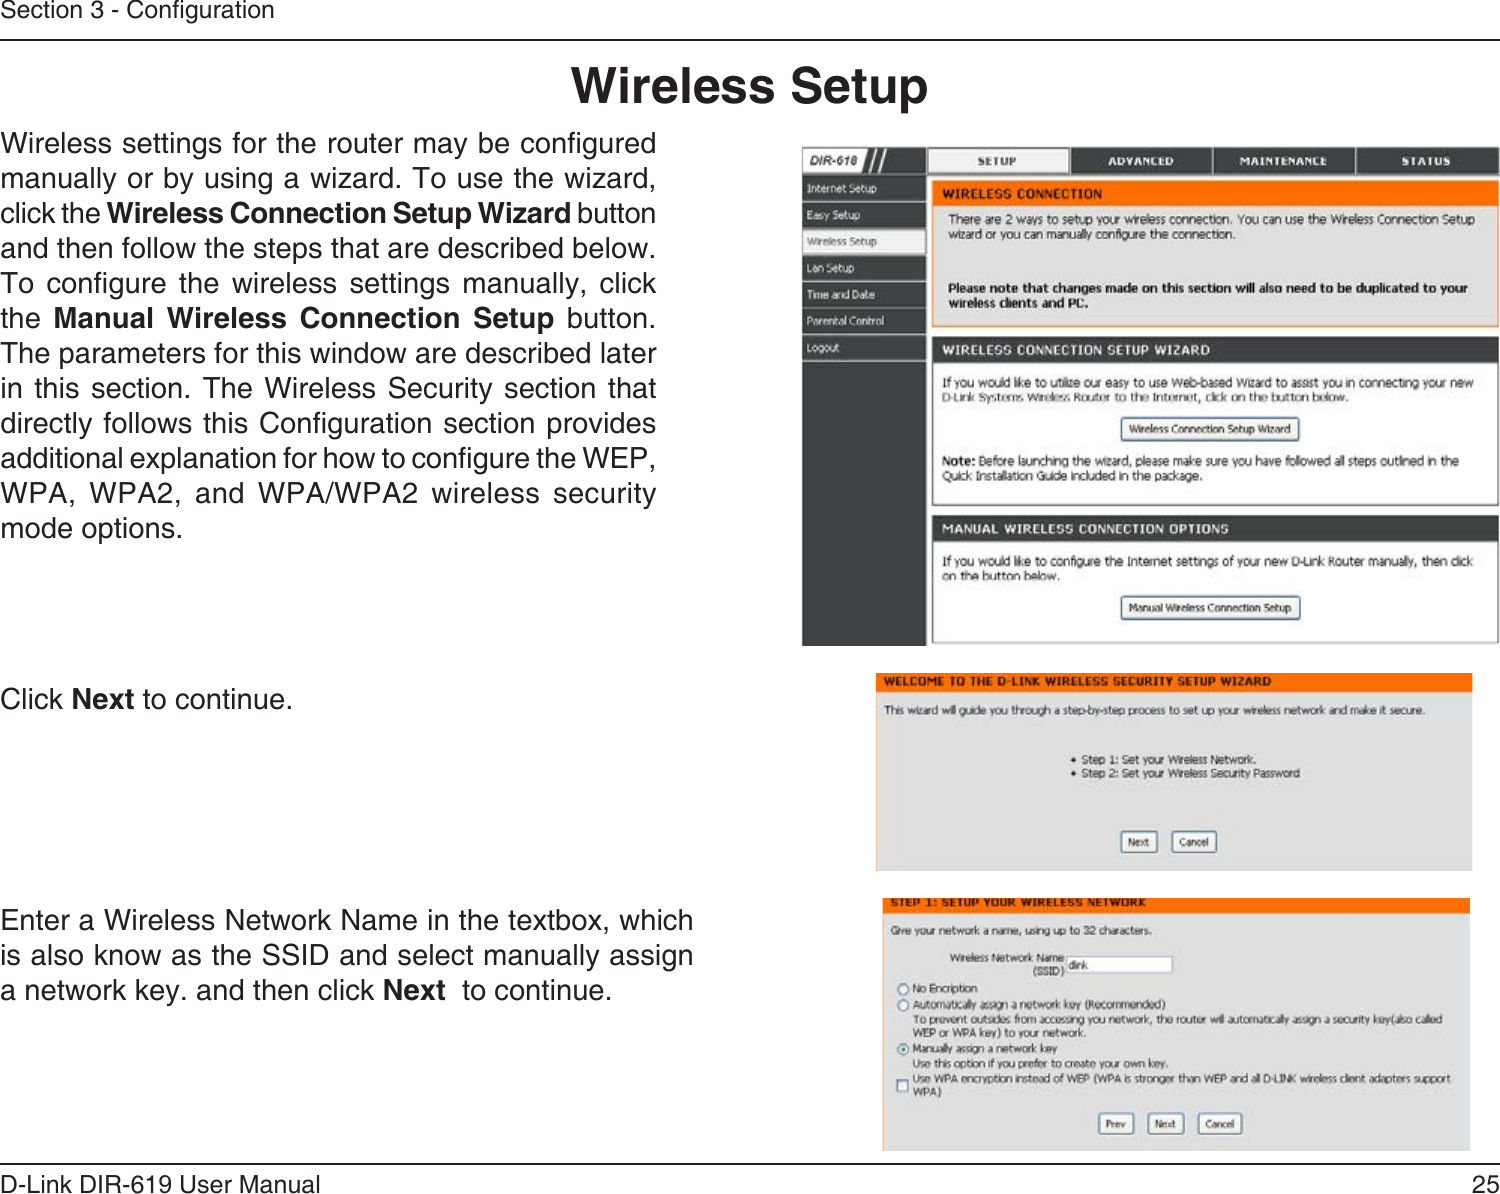 25D-Link DIR-619 User ManualSection 3 - CongurationWireless SetupWireless settings for the router may be congured manually or by using a wizard. To use the wizard, click the Wireless Connection Setup Wizard buttonand then follow the steps that are described below.To congure the wireless settings manually, click the  Manual Wireless Connection Setup button. The parameters for this window are described laterin this section.  The Wireless Security  section thatdirectly follows this Conguration section provides   additional explanation for how to congure the WEP, WPA, WPA2, and WPA/WPA2 wireless security mode options. Click Next to continue.Enter a Wireless Network Name in the textbox, which is also know as the SSID and select manually assigna network key. and then click Next  to continue.